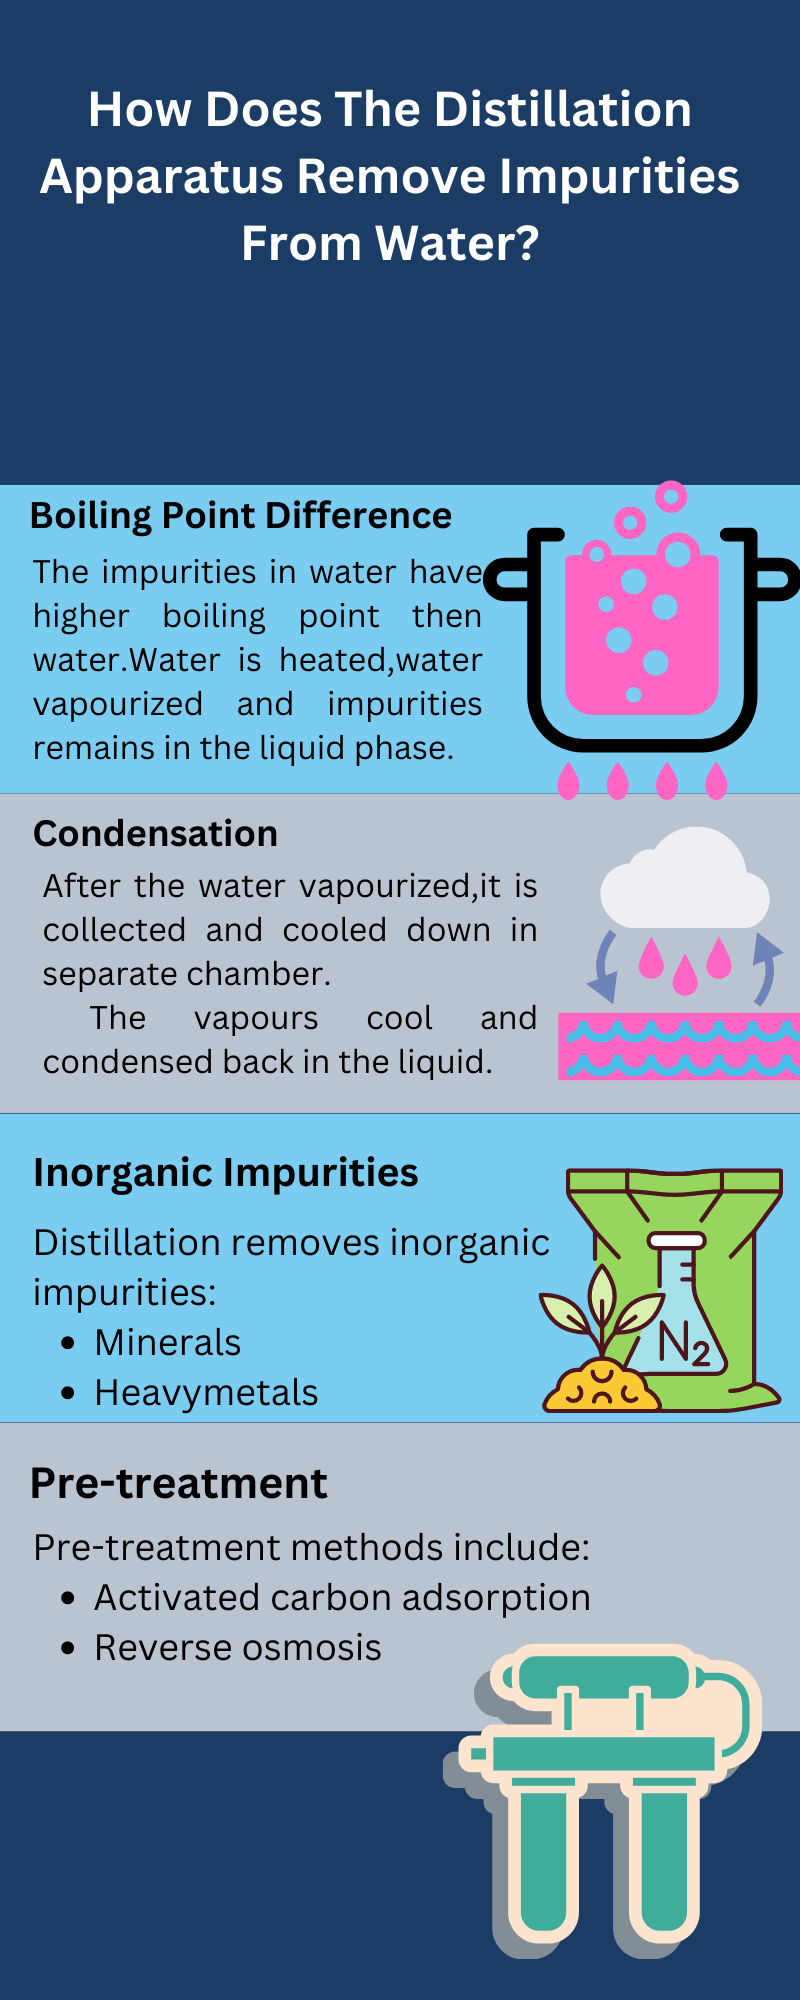 HOW does the distillation apparatus remove impurities from water - infographic